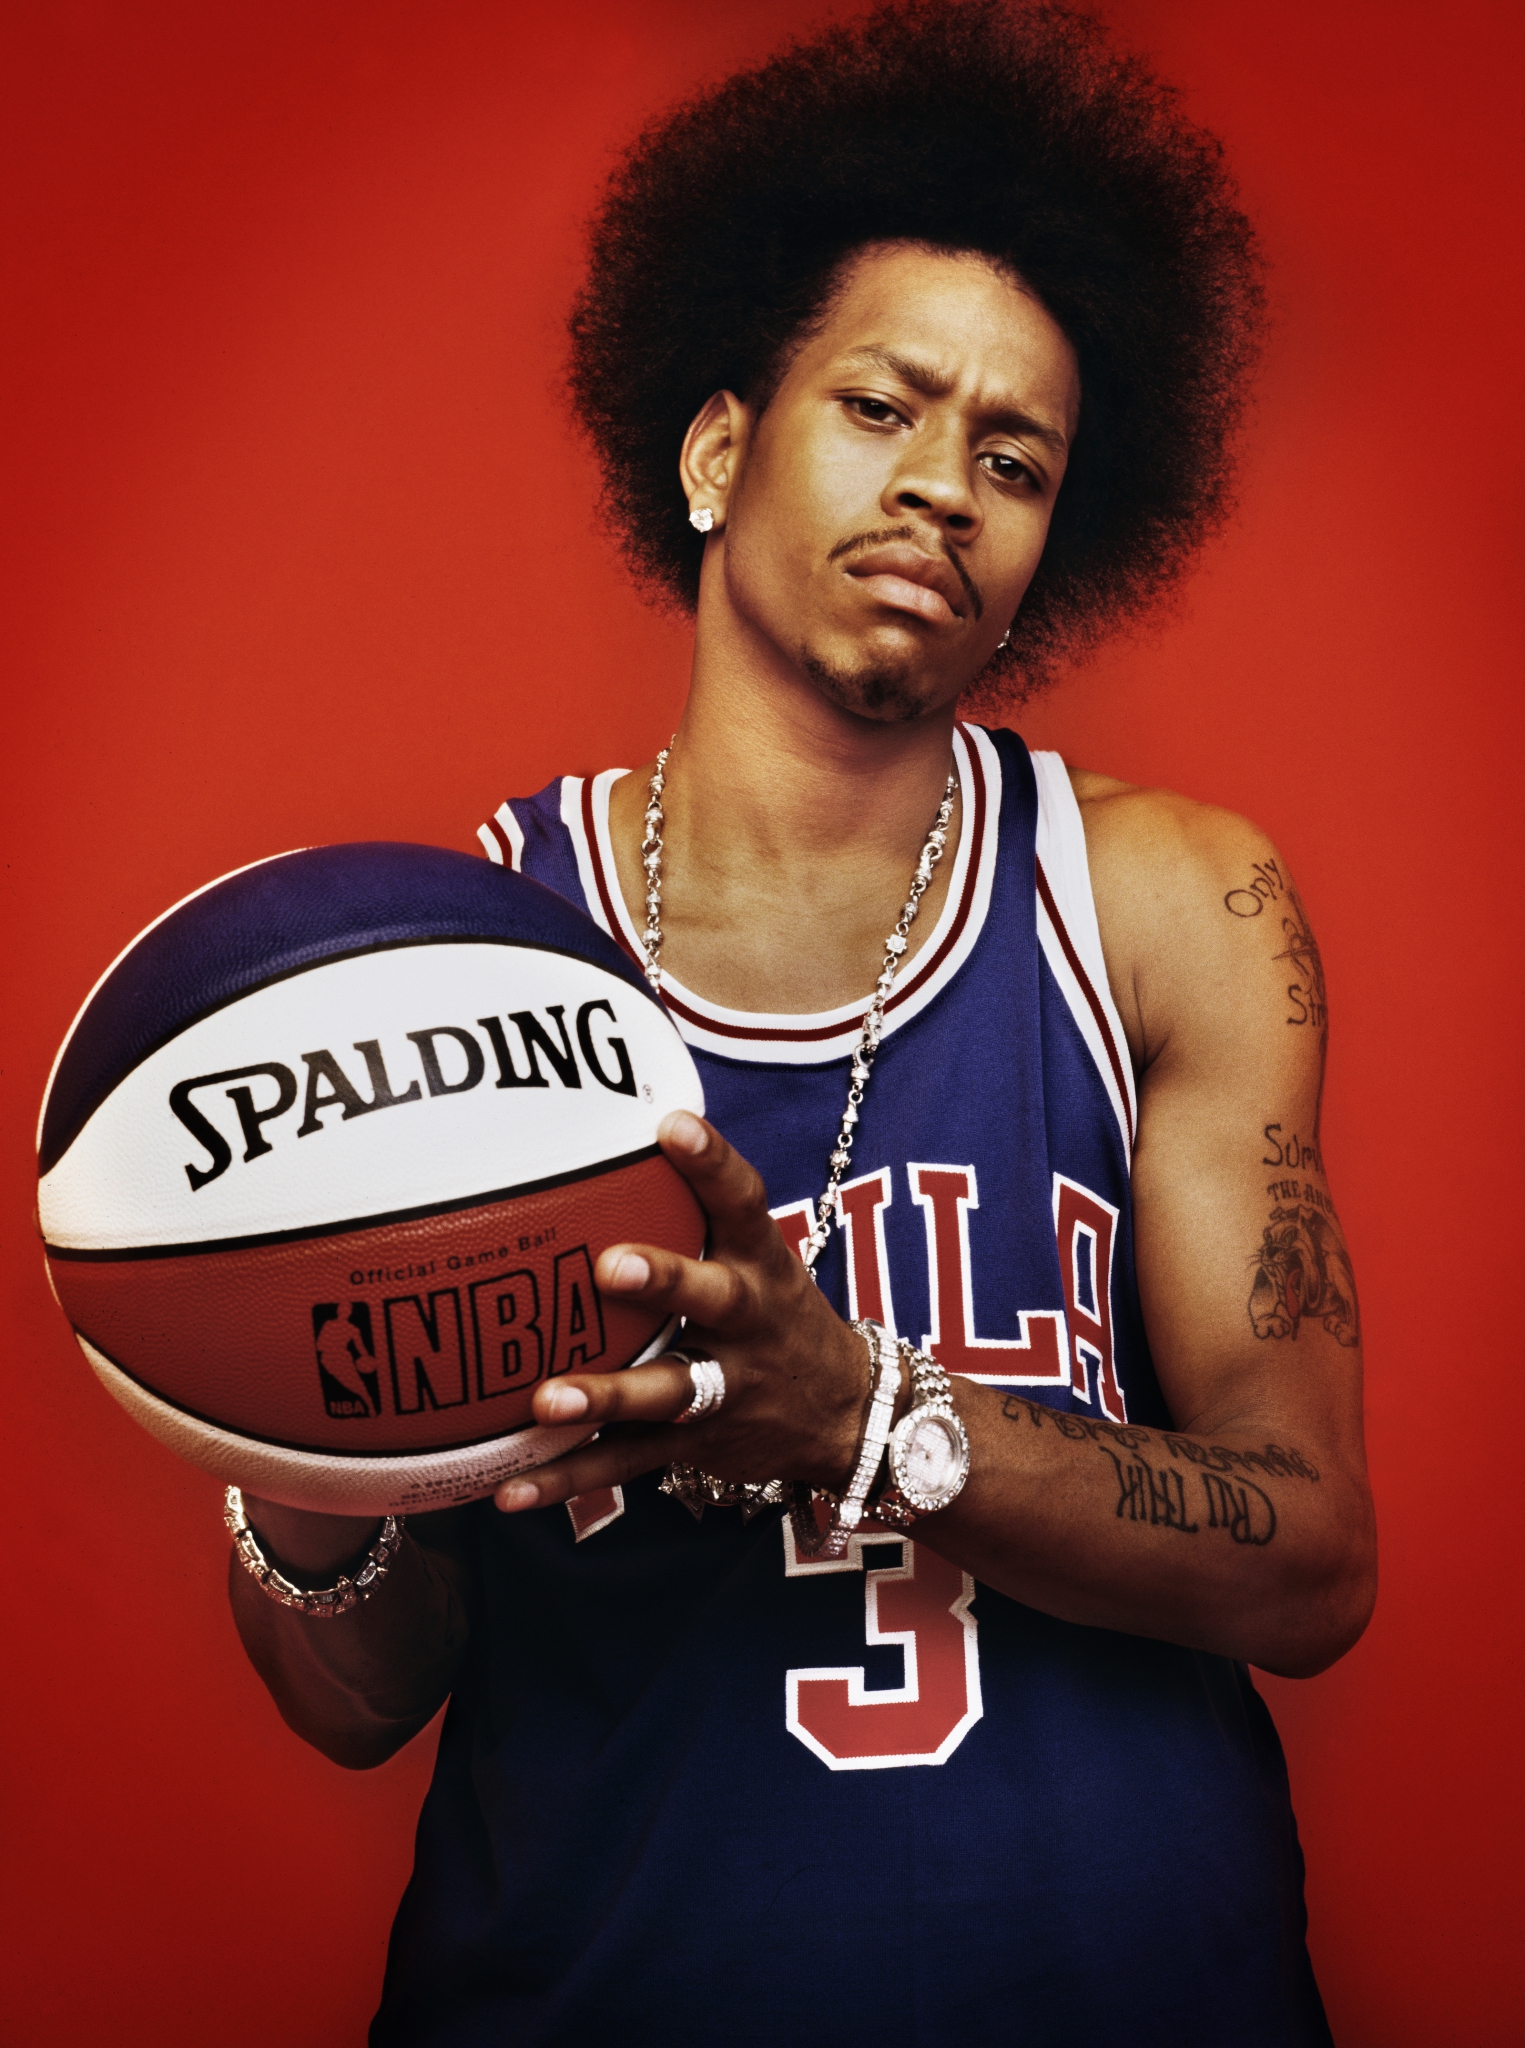 Allen Iverson's iconic 'Slam' magazine cover still resonates 20 years later